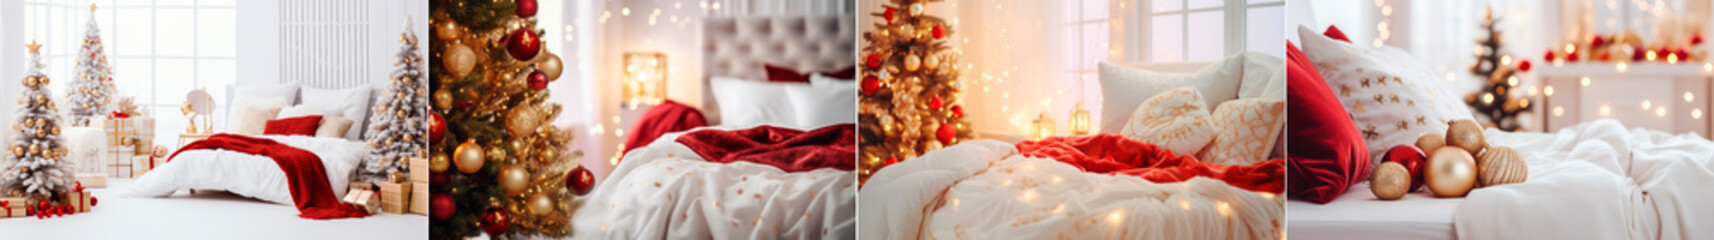 Fototapeta na wymiar Create a festive Christmas atmosphere with a red, gold and white tree. Decorate your bedroom with cozy white decorations and fluffy white linens. Complete the look with beautifully wrapped gifts.